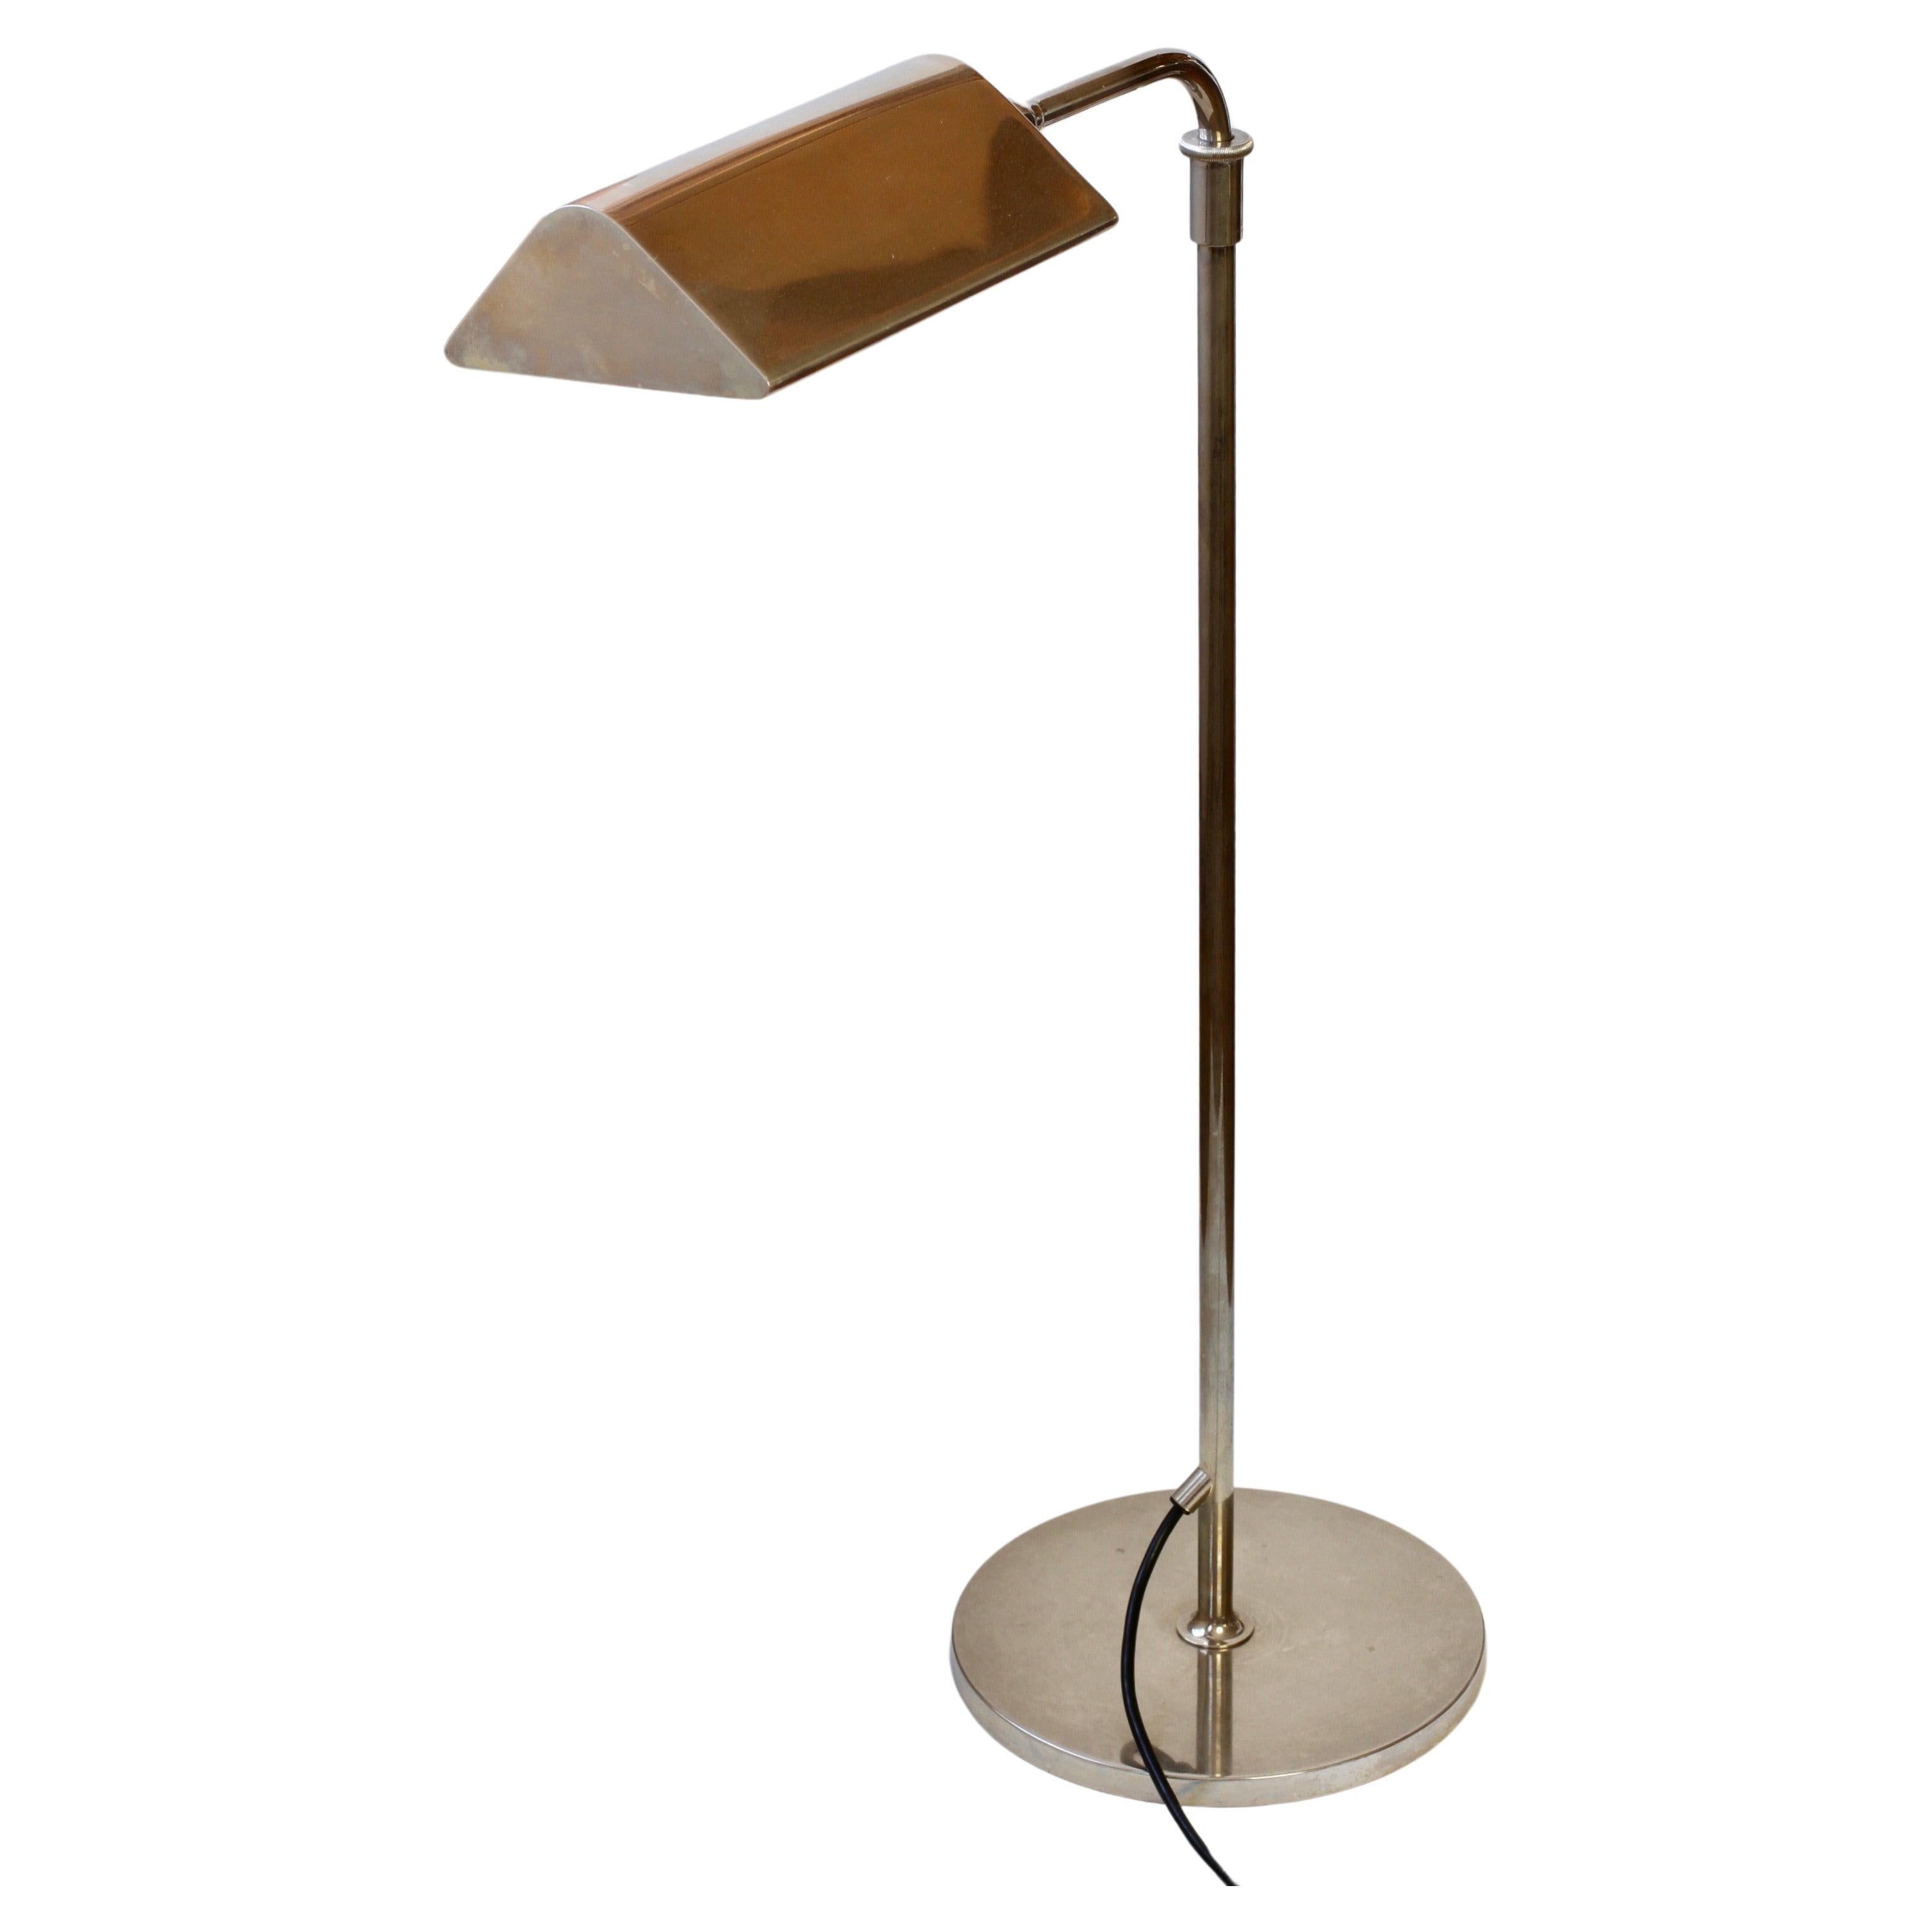 Mid-Century Modern vintage German floor lamp designed by Florian Schulz circa 1970s - this particular example was probably manufactured in the late 1980s and is in excellent vintage condition. Made of polished nickel plated metal, the lamp is height